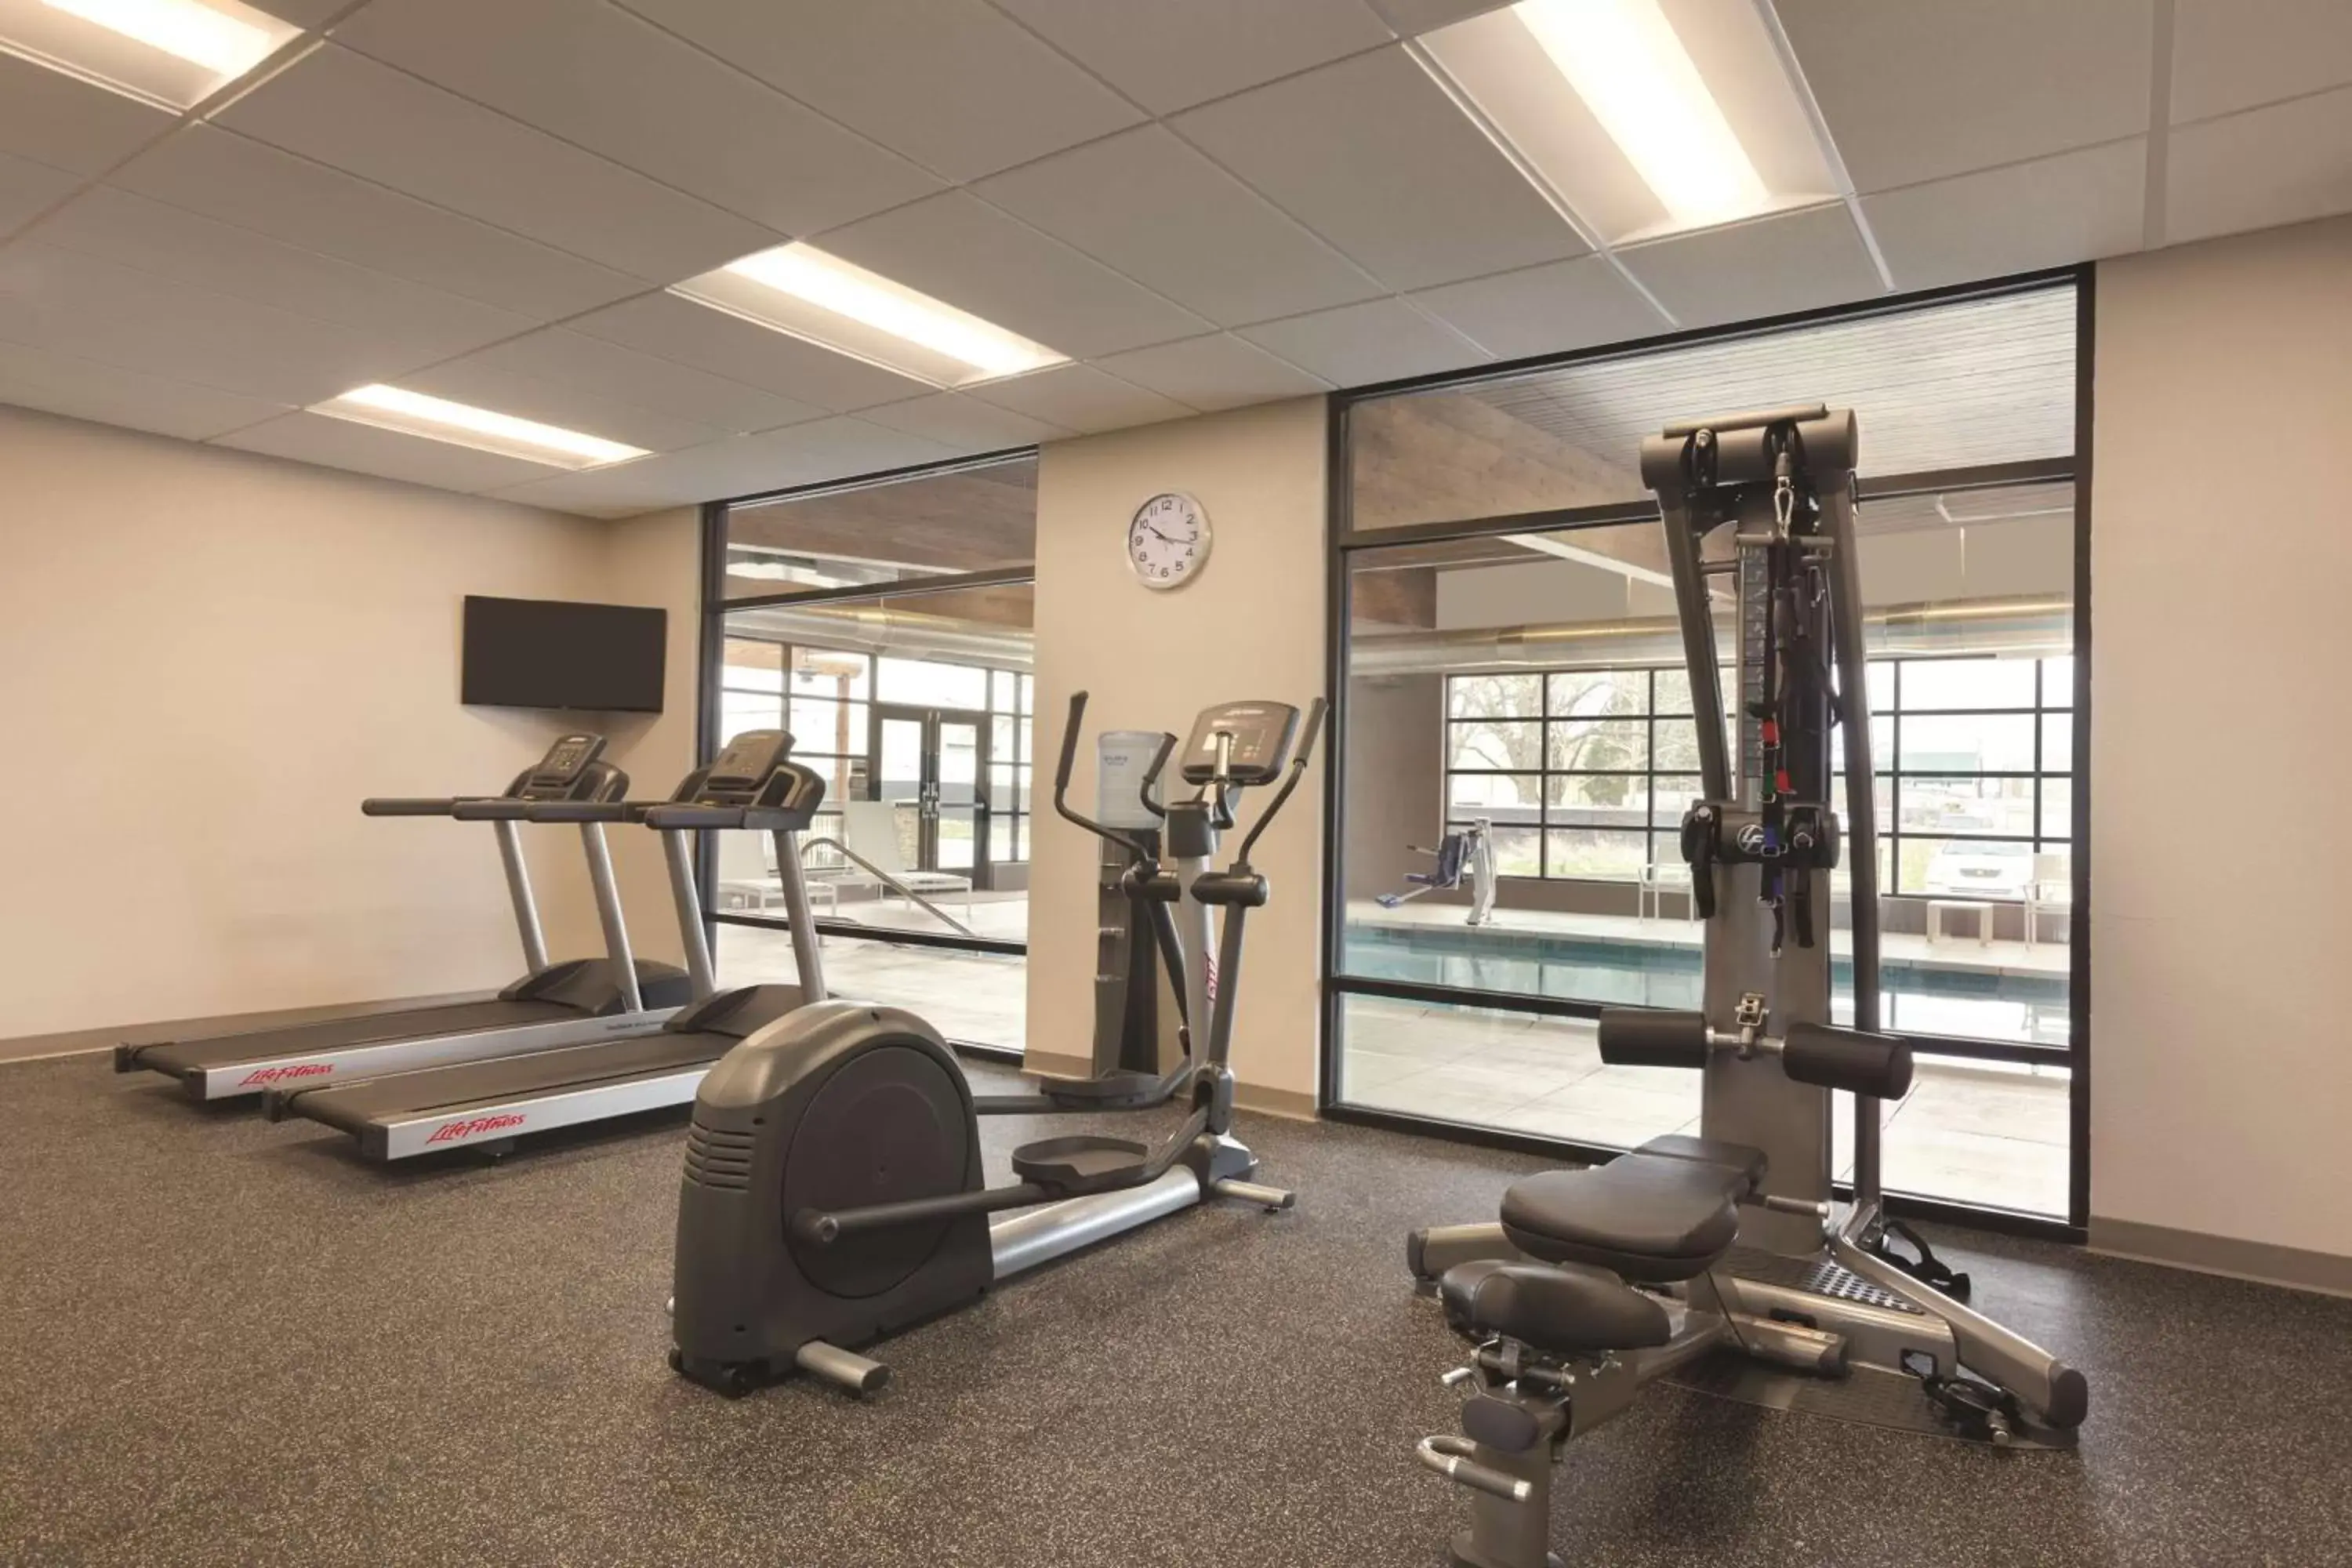 Activities, Fitness Center/Facilities in Country Inn & Suites by Radisson, Lawrence, KS